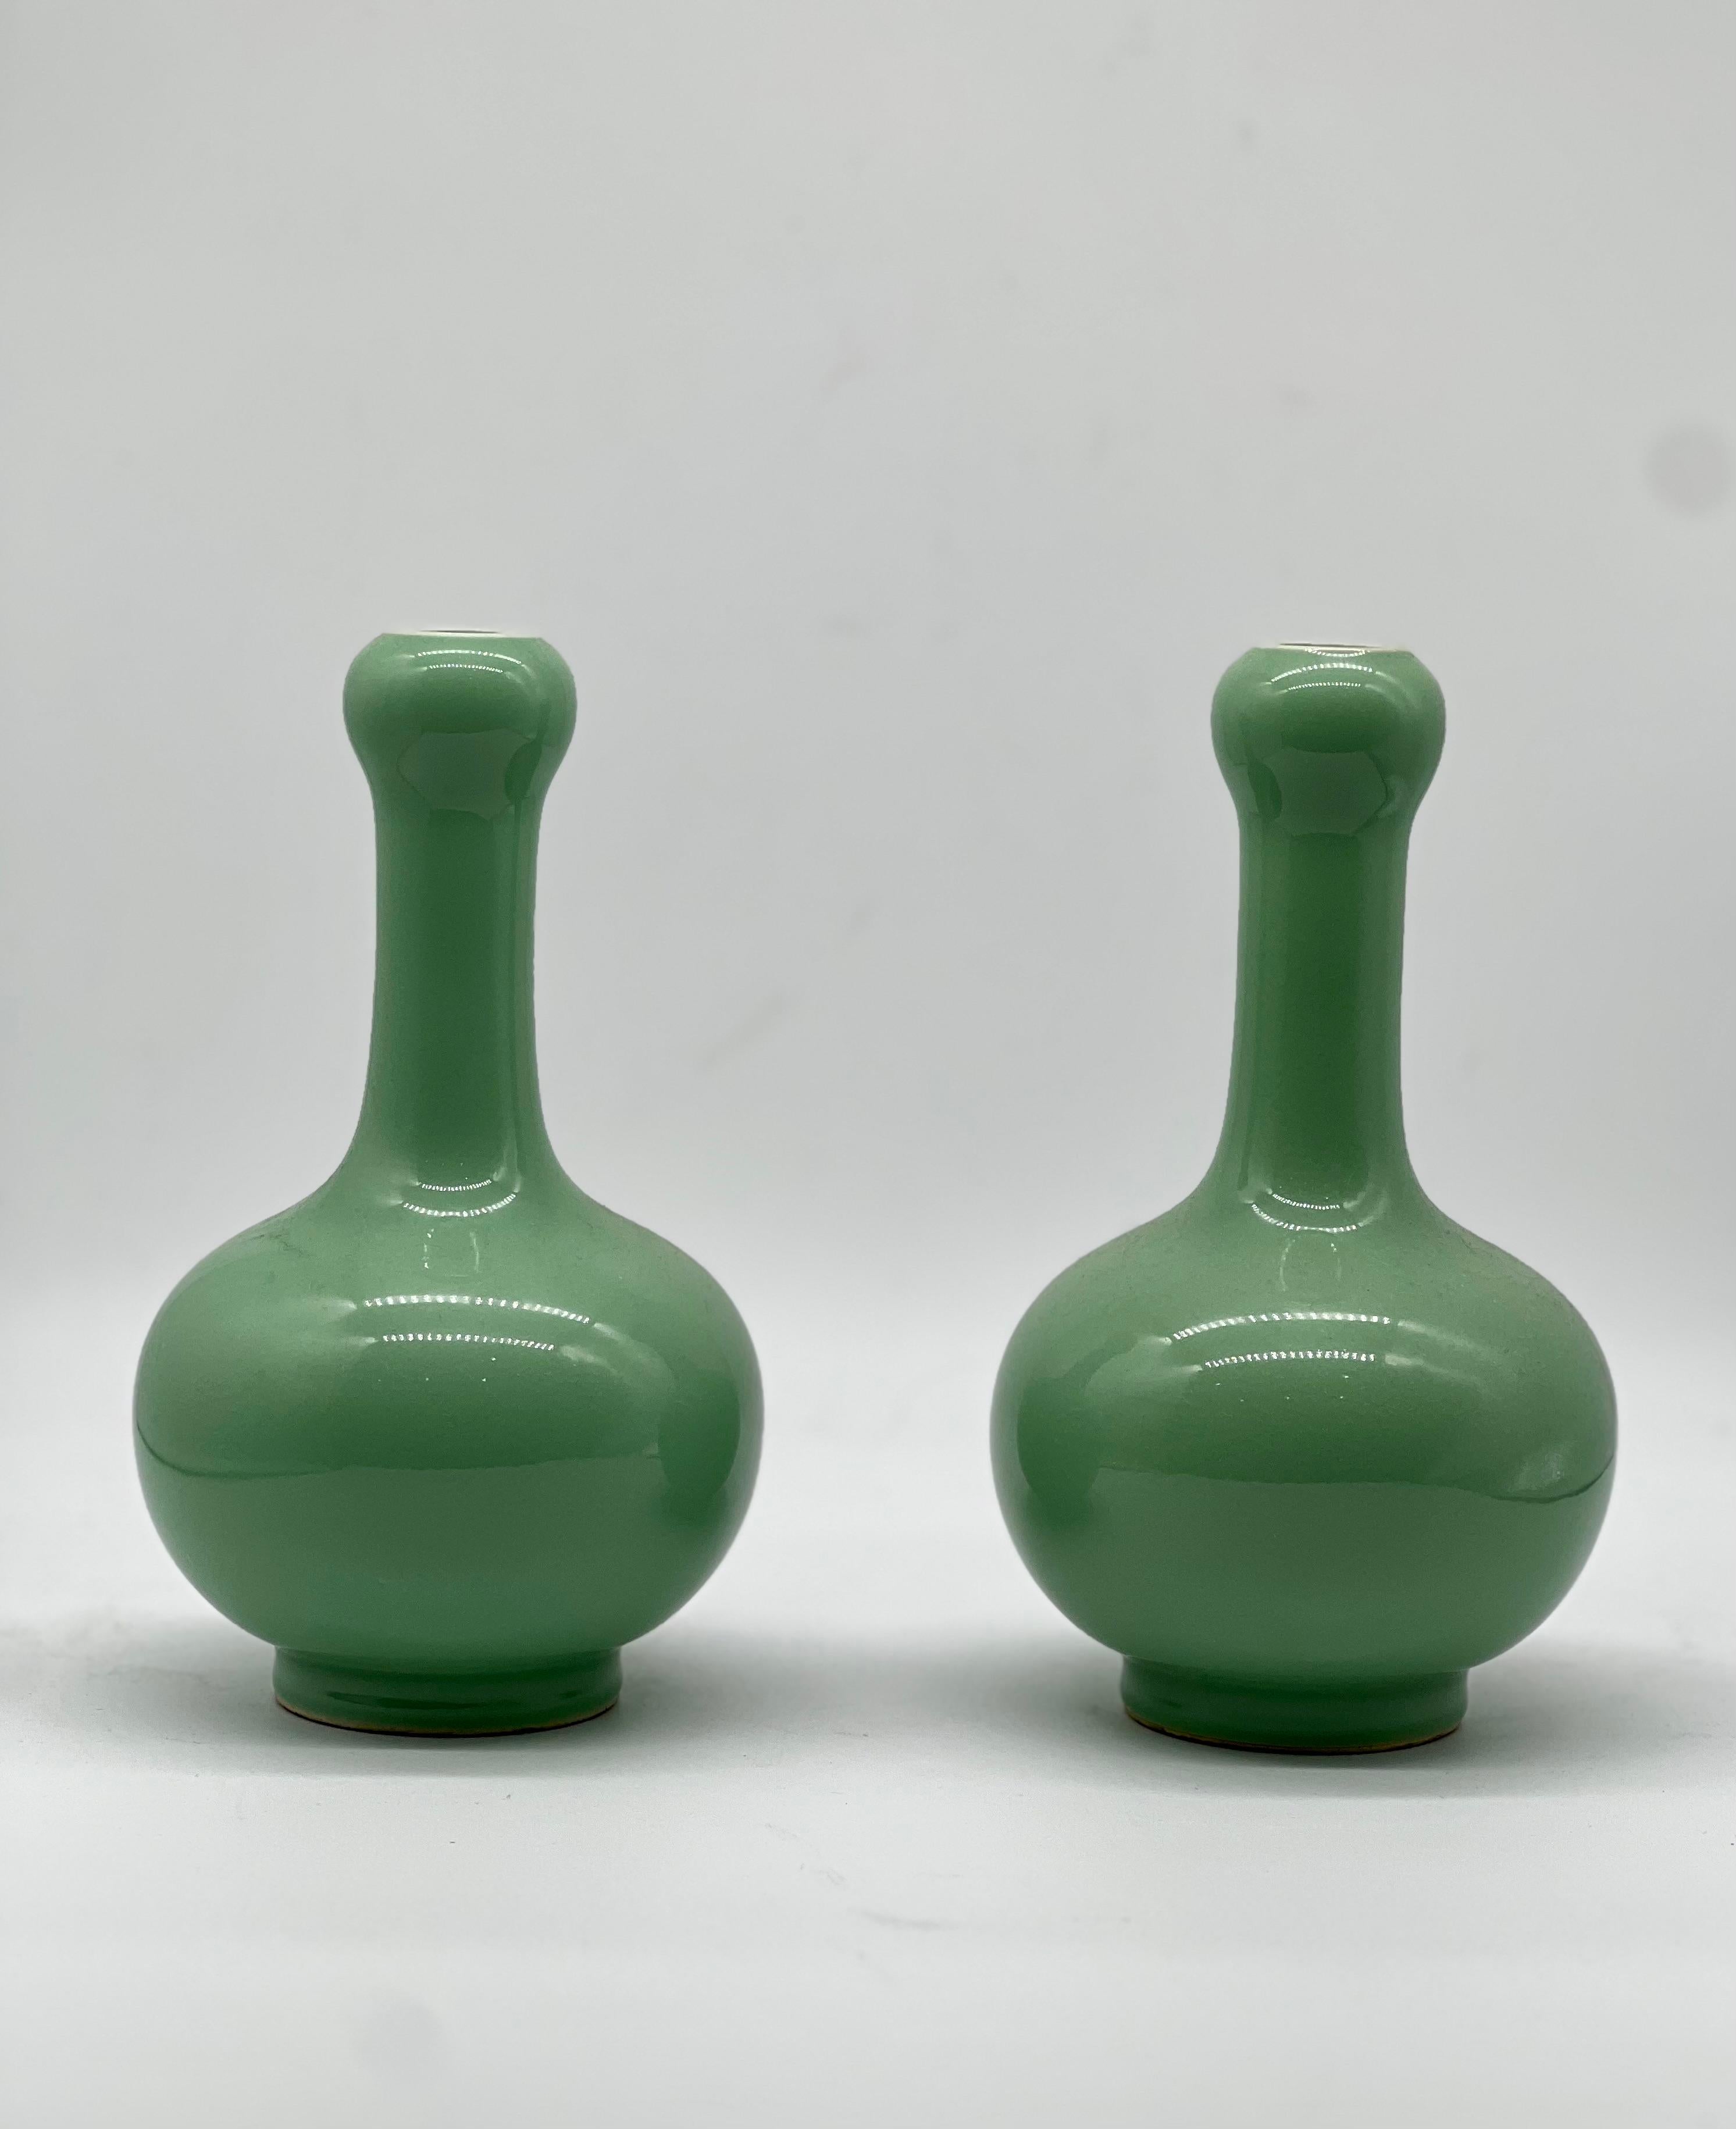 A fine pair of Chinese monochrome apple green glazed vases 
20th C.
in garlic bottle shape , bulbous lower belly, cylindrical neck, enlarge onion head shape, raised on short ring foot.
All reserved hand painted and masterfully covered in an even